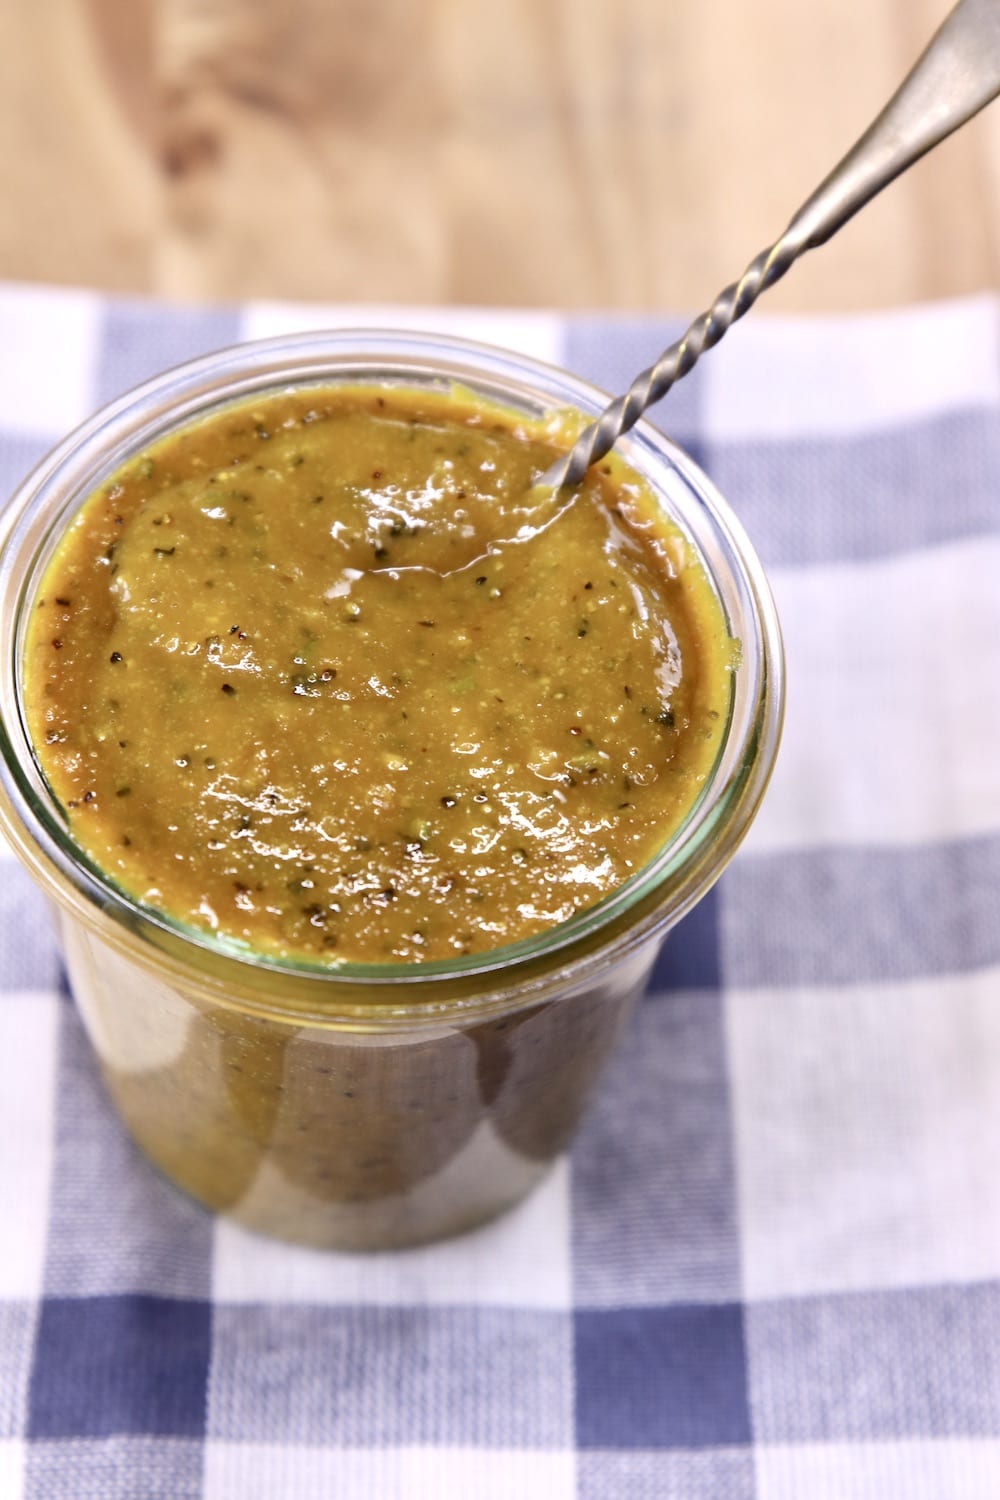 Jar of Rosemary Mustard Sauce with a spoon sitting on a blue stripe towel